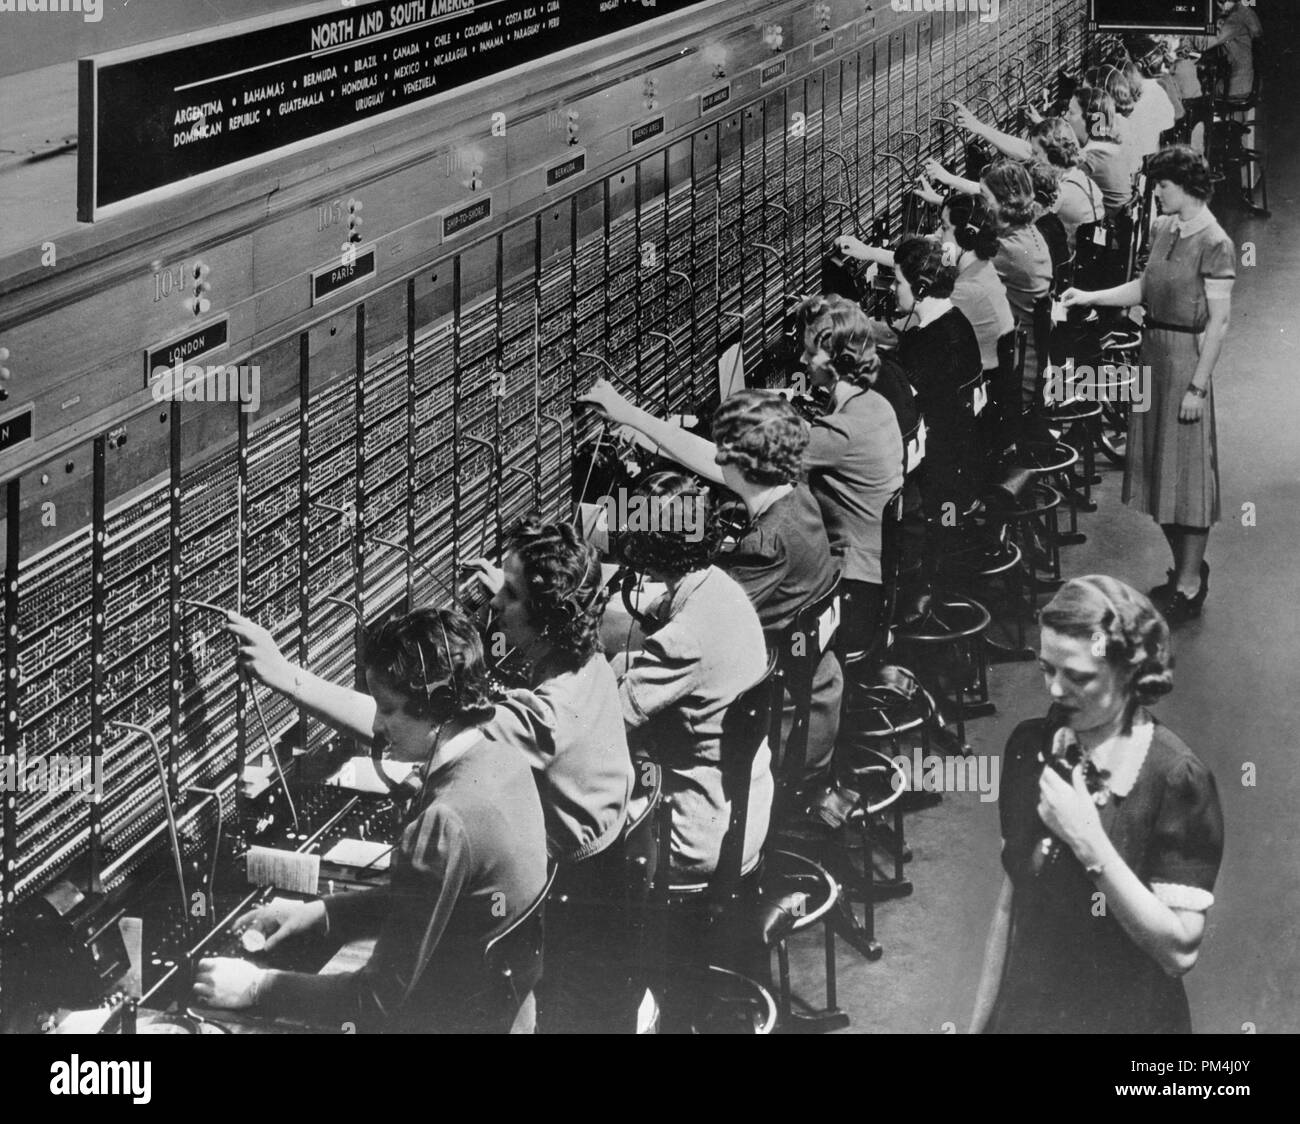 A Bell System switchboard where overseas calls are handled. Not all of the services shown are available during wartime conditions. December 22,1943   File Reference # 1003 459THA Stock Photo